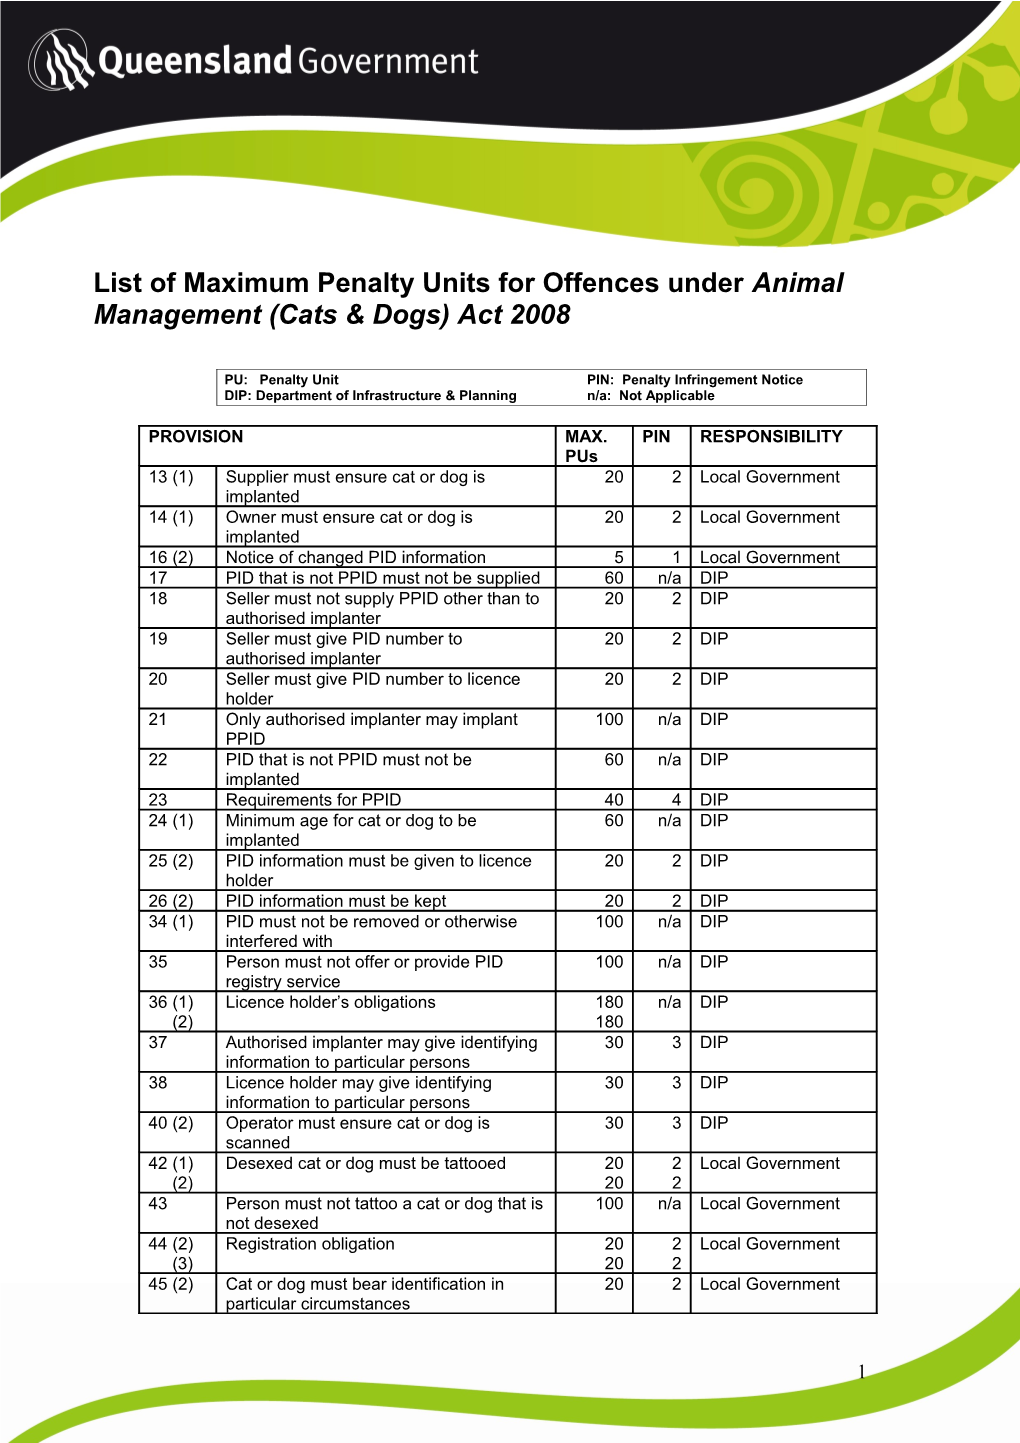 List of Maximum Penalty Units for Offences Under Animal Management (Cats & Dogs) Act 2008